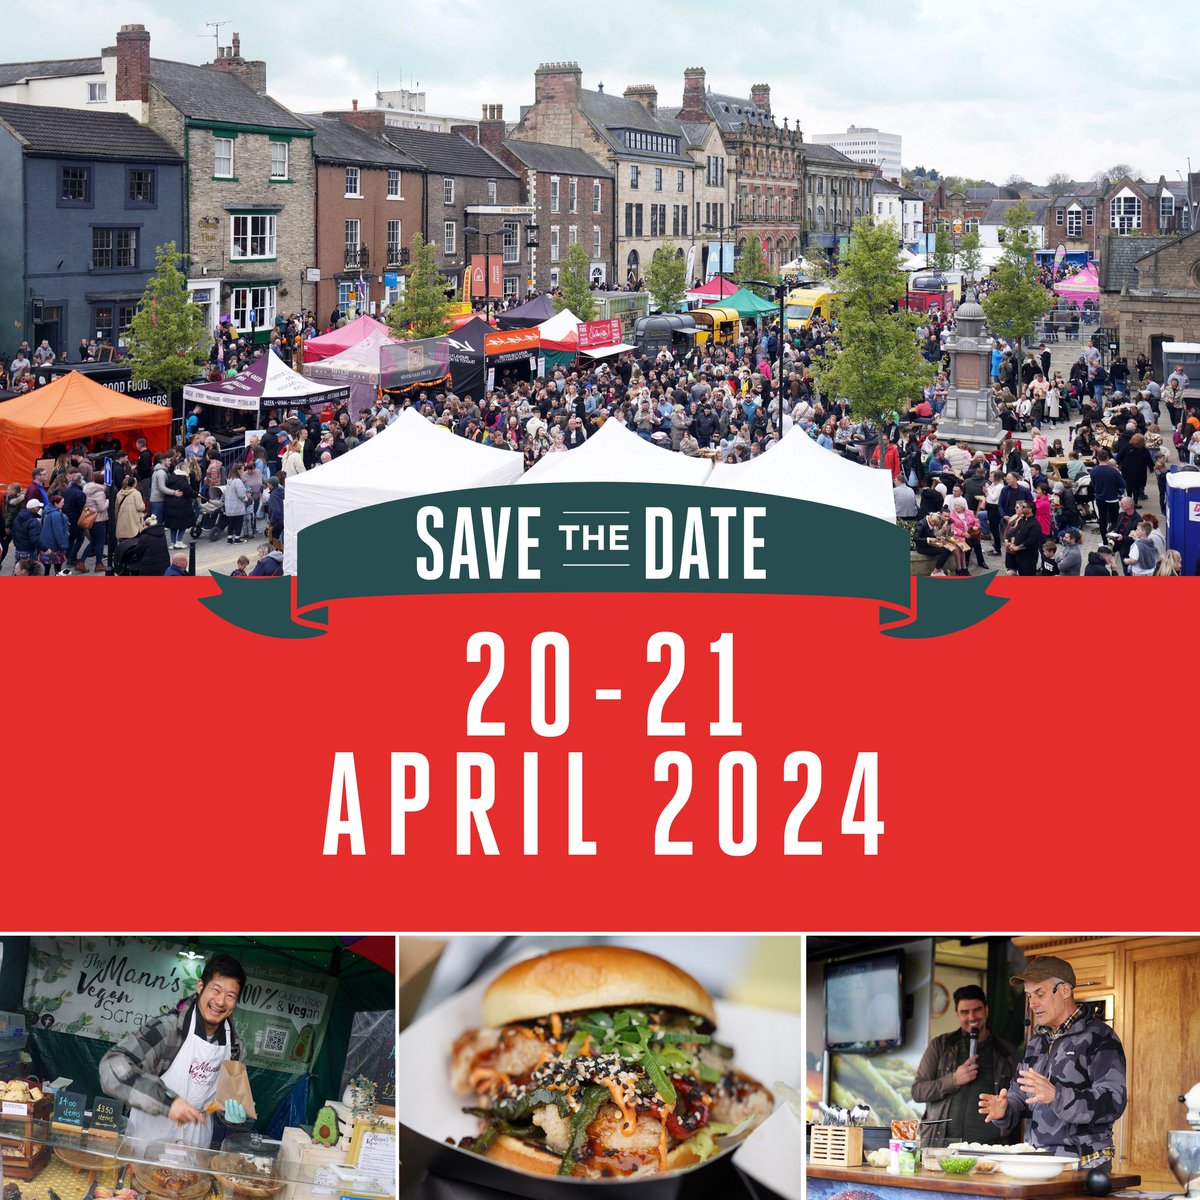 🎉🗓️ 🍕 A reminder to save the date! #BishFoodFest 2024 will take place on April 20 - 21! The festival is FREE to attend! Over 150 fantastic traders, celebrity chefs, entertainment, workshops and much more! You can find out more: bishopaucklandfoodfestival.co.uk